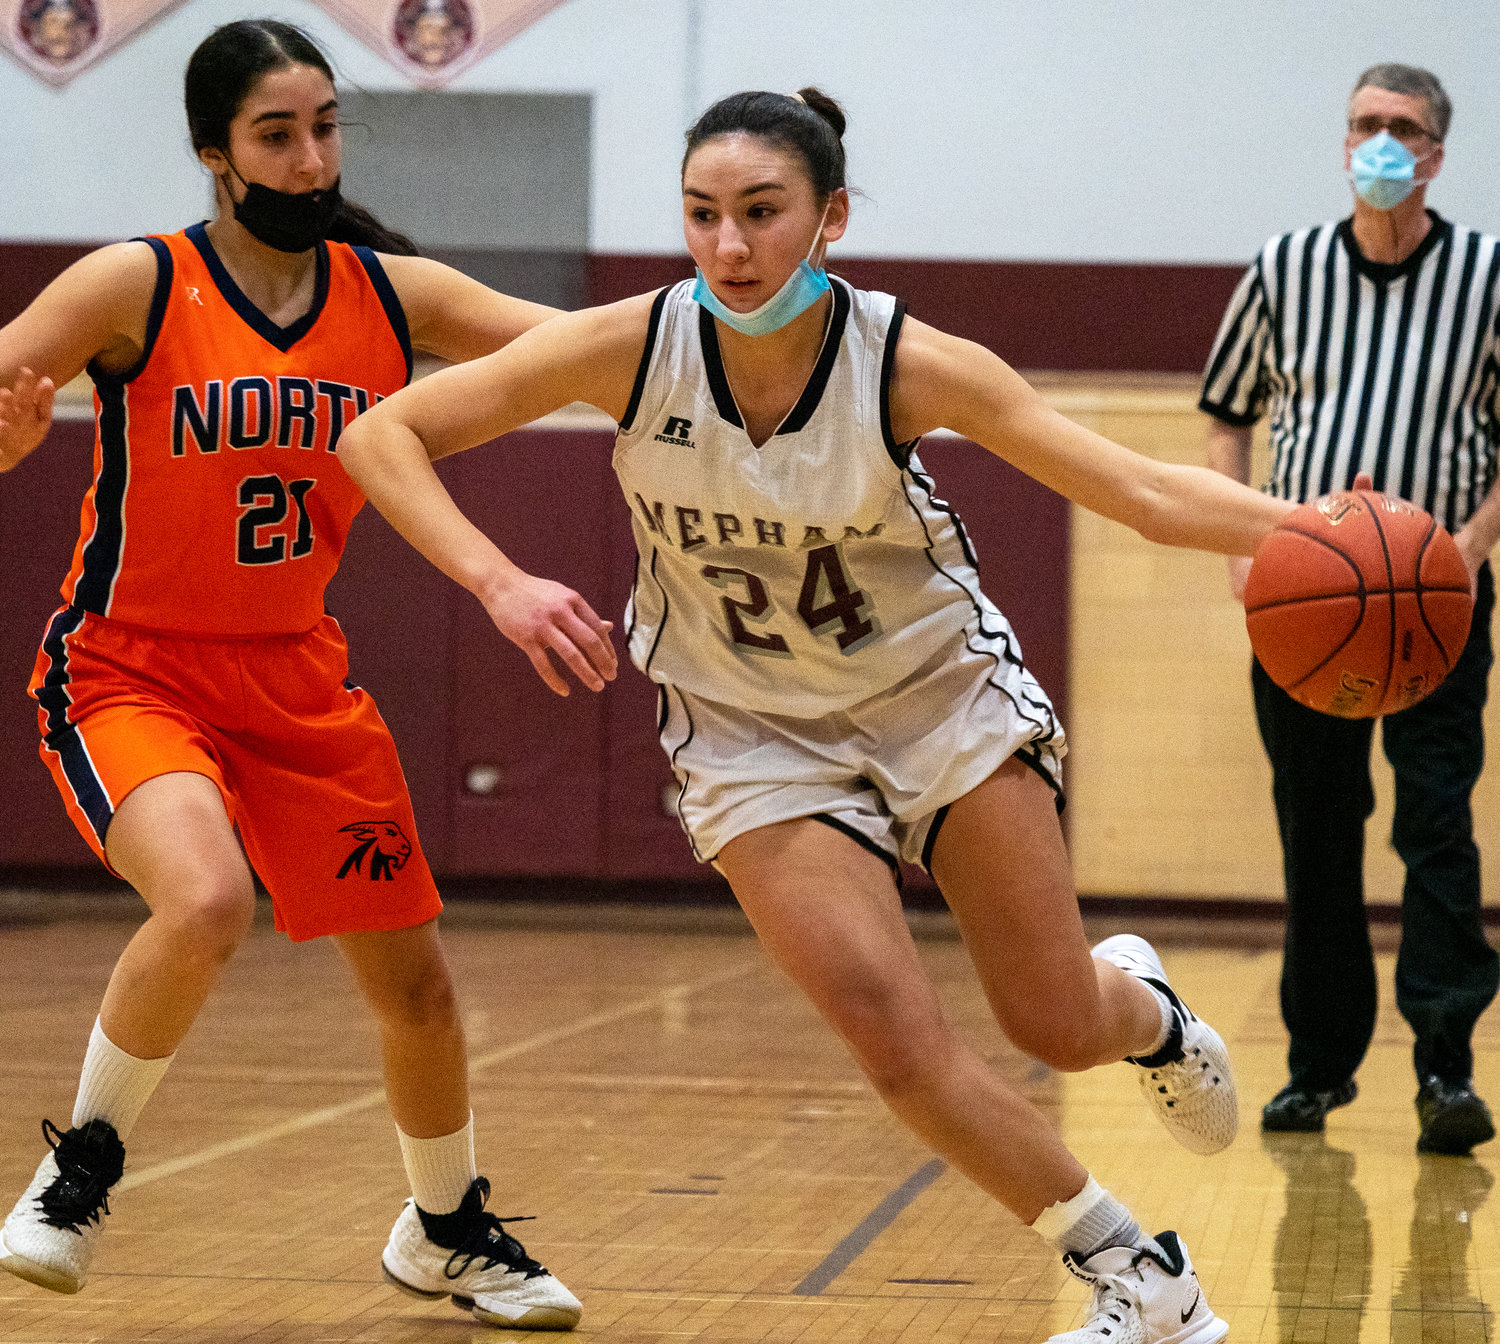 Mepham senior Hailey Guerrero, right, ranks among the Top 10 scorers in Nassau County at nearly 21 points per game and is one of three D1 athletes on the roster.